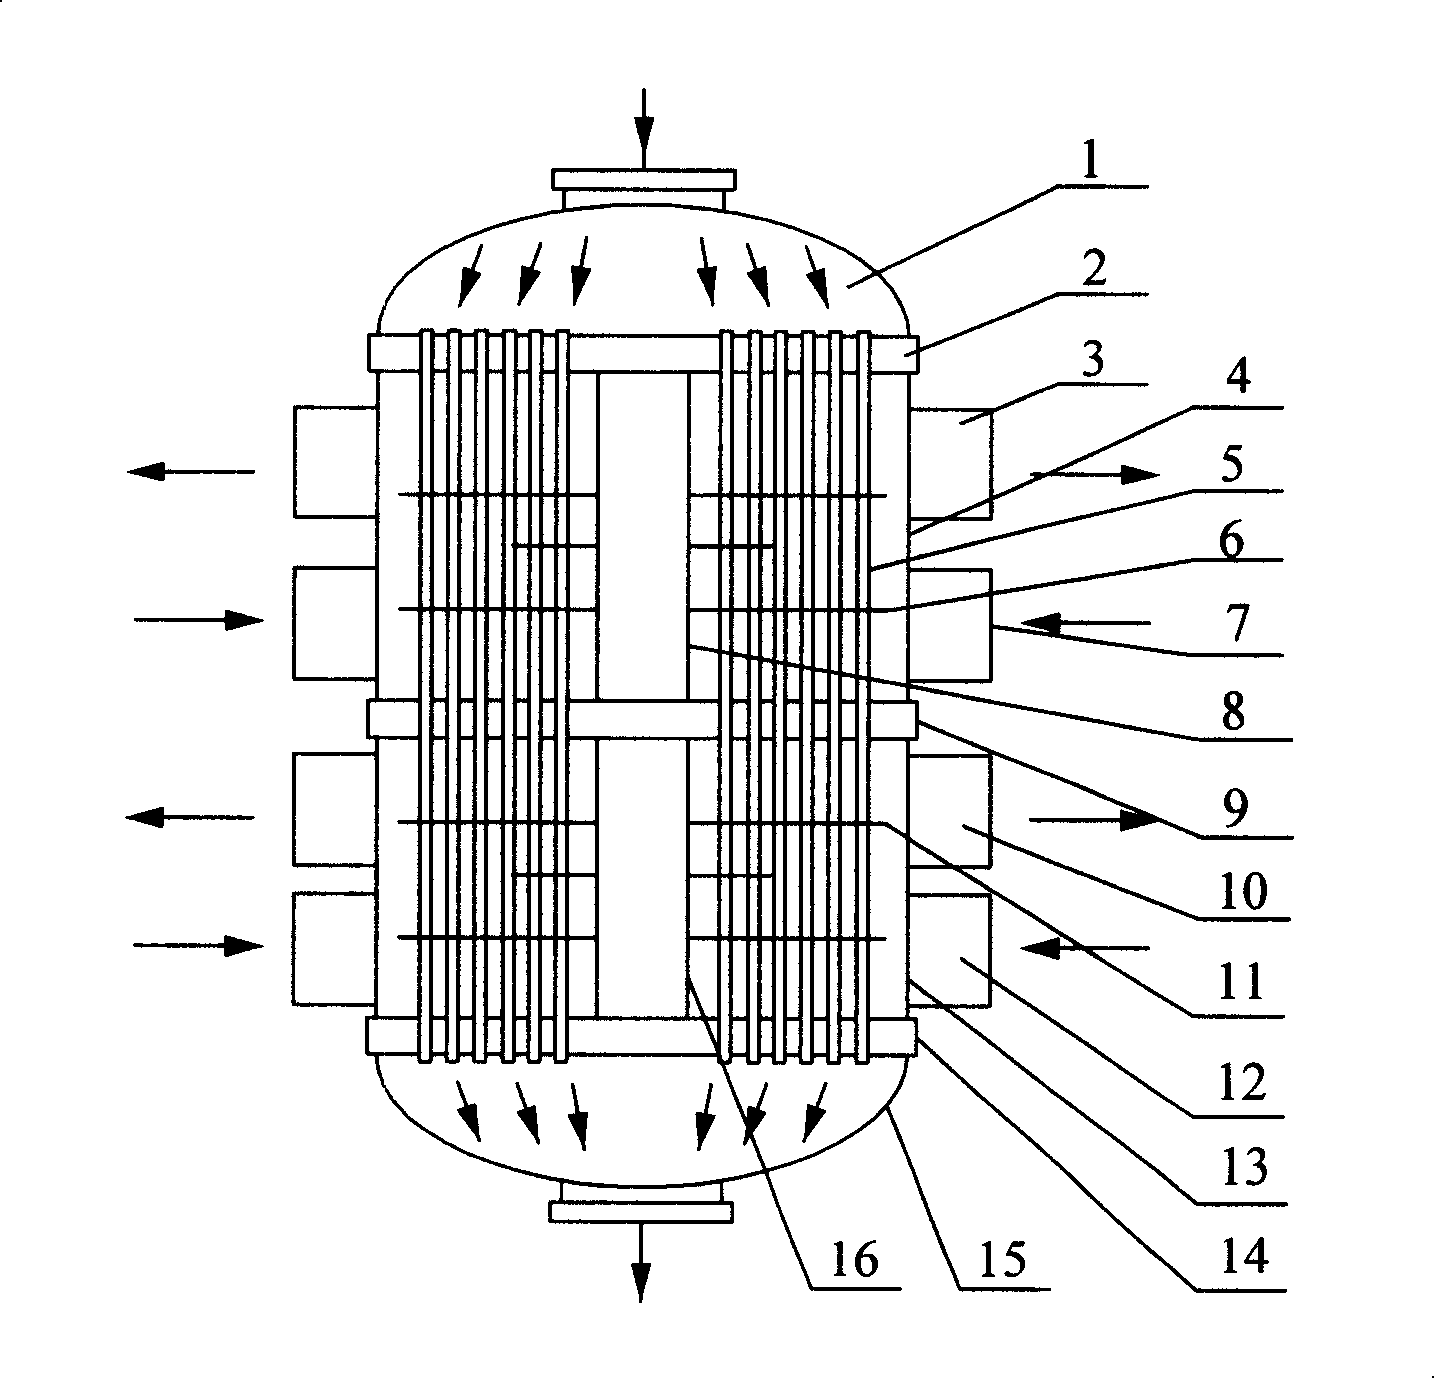 Shell pass multi-cavity type multi-layer bed fixed bed reactor